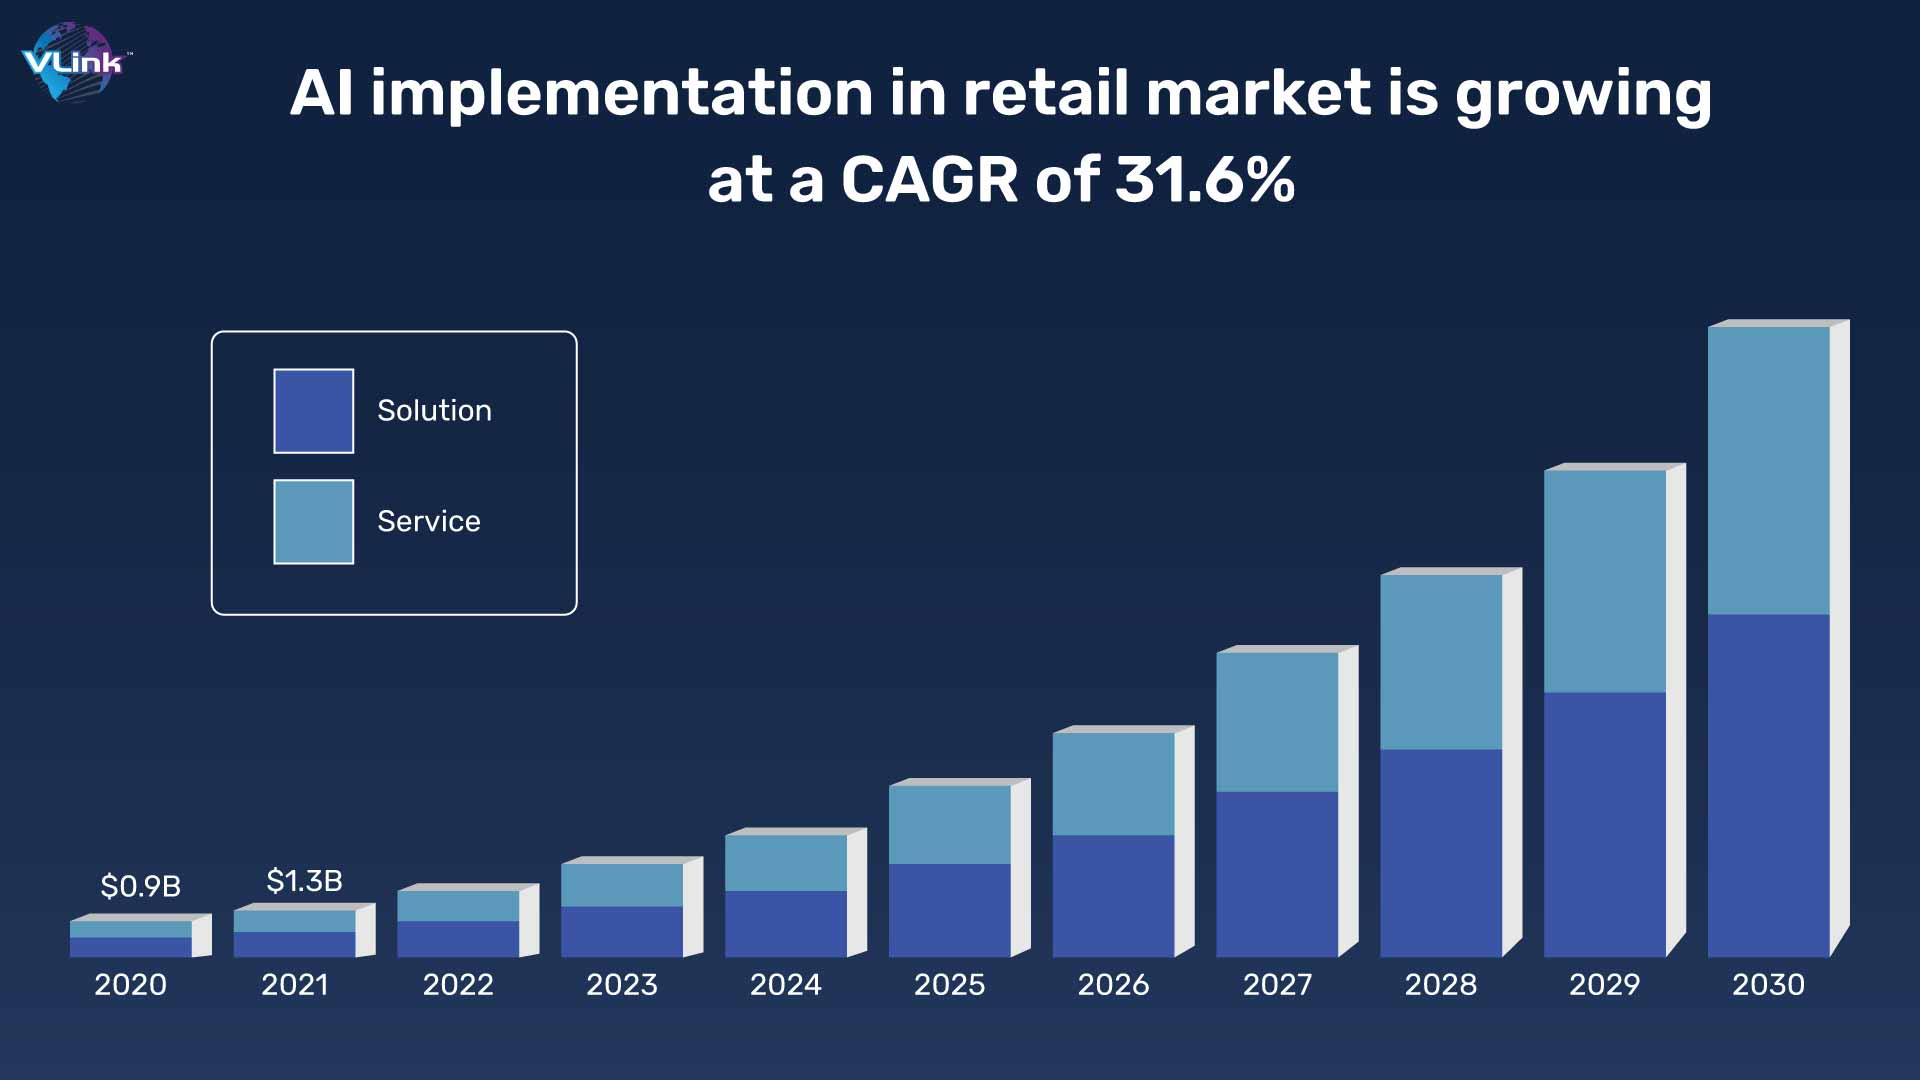 AI implementation in retail market is growing at a CAGR of 31.6%